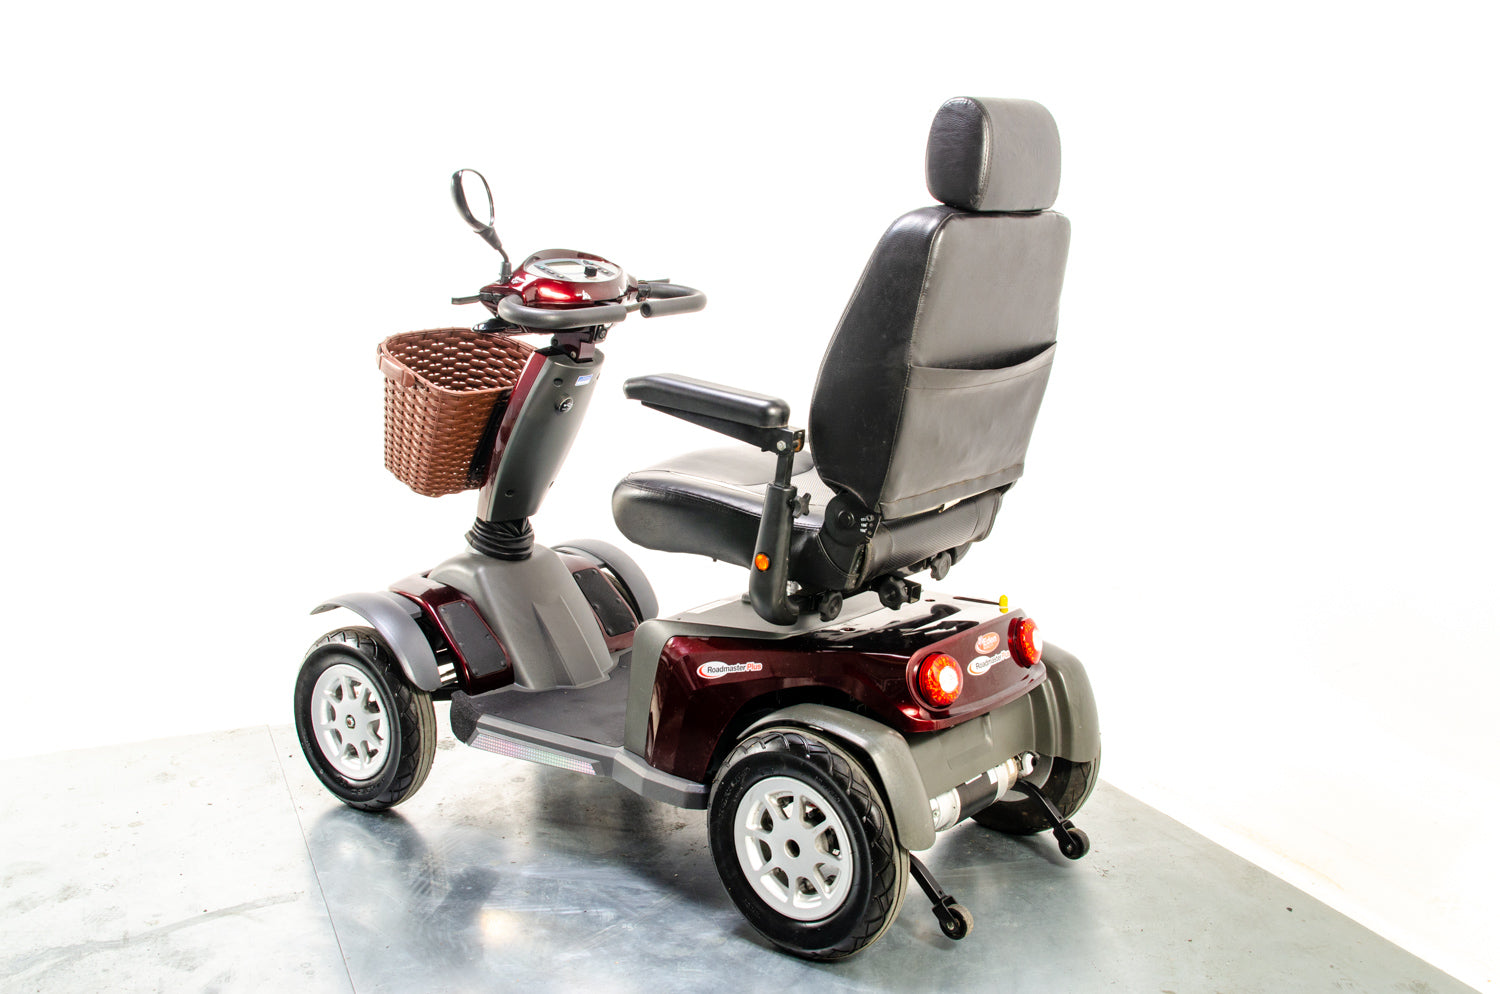 Eden Roadmaster Plus All-Terrain Road Used Mobility Scooter ATV Luxury Electric Large 13371